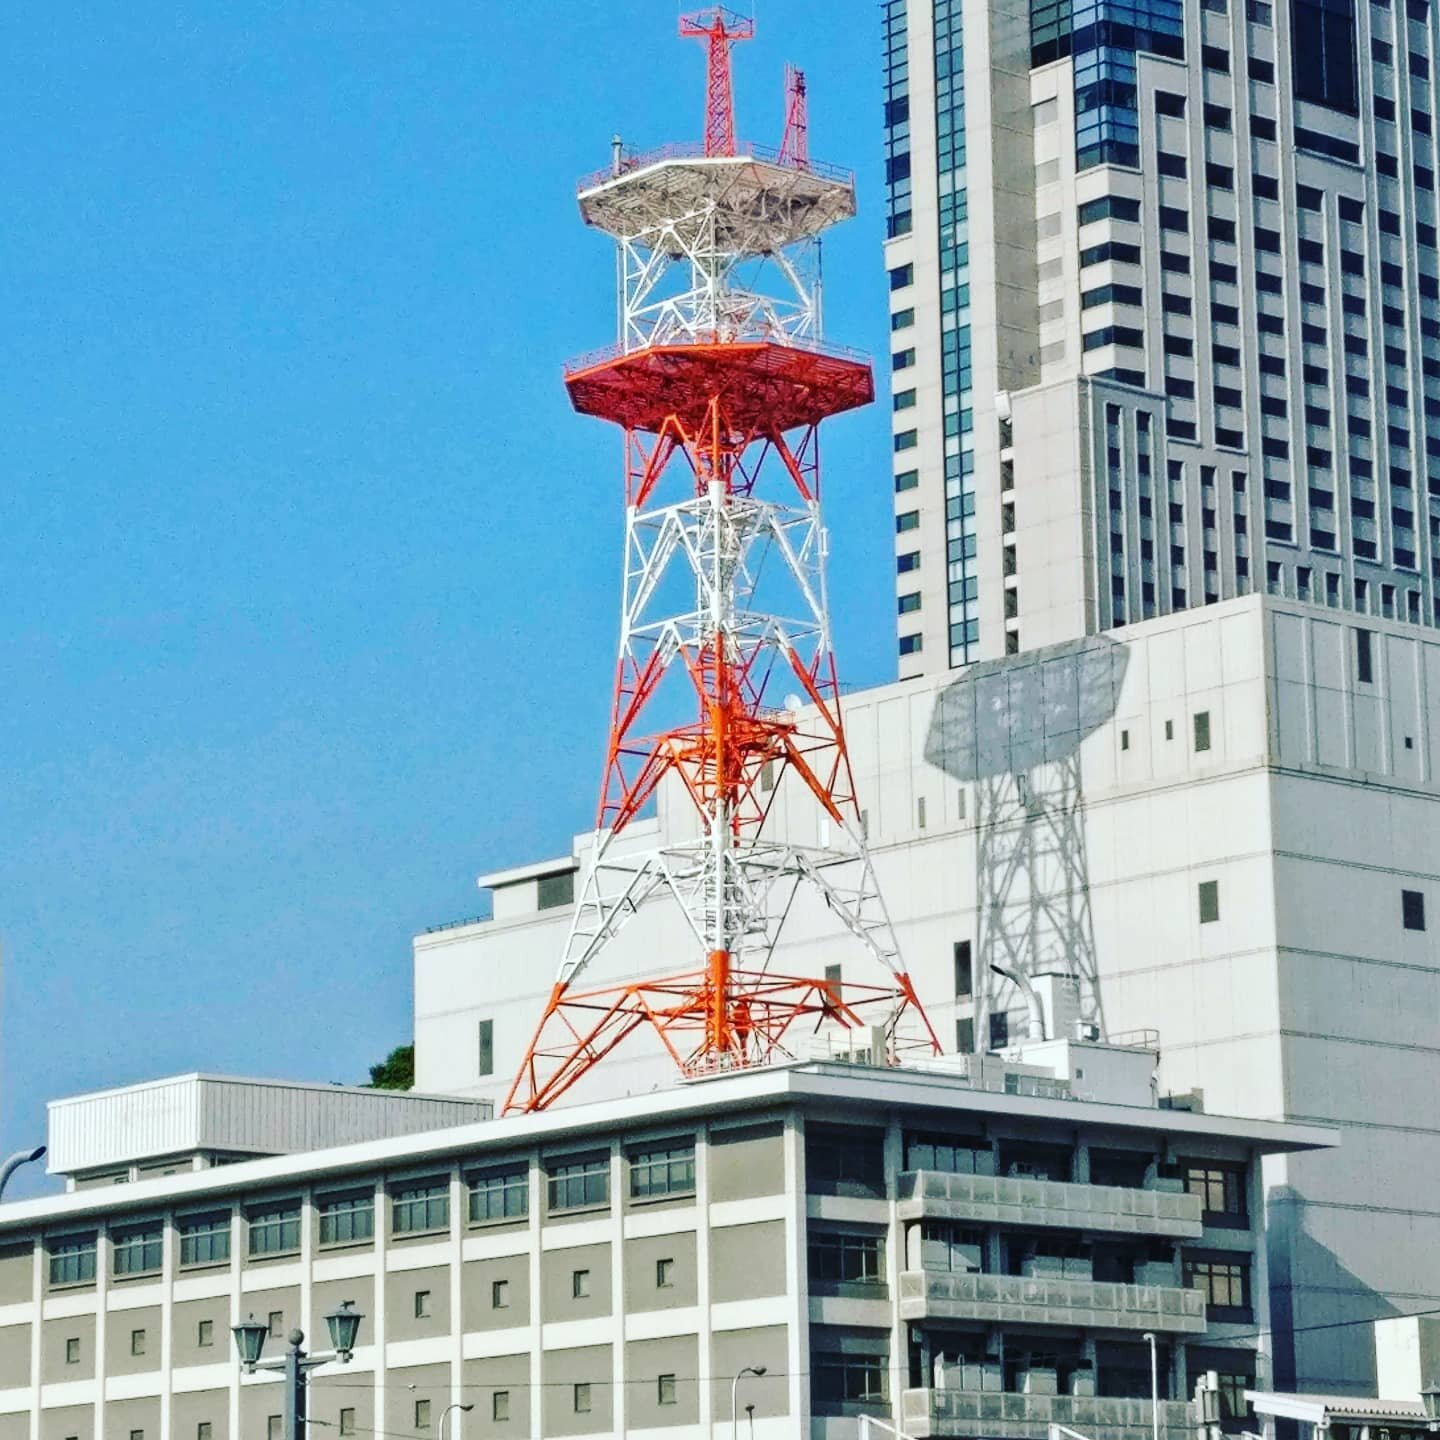 #towers cover our built environment. They are needed for #cellular #communications, #radio, #publicsafety #weather, and so many other applications. This photo was taken in Japan. 

#5g #5gtowers #steel #cellphone #travelphotography #travel #traveljap